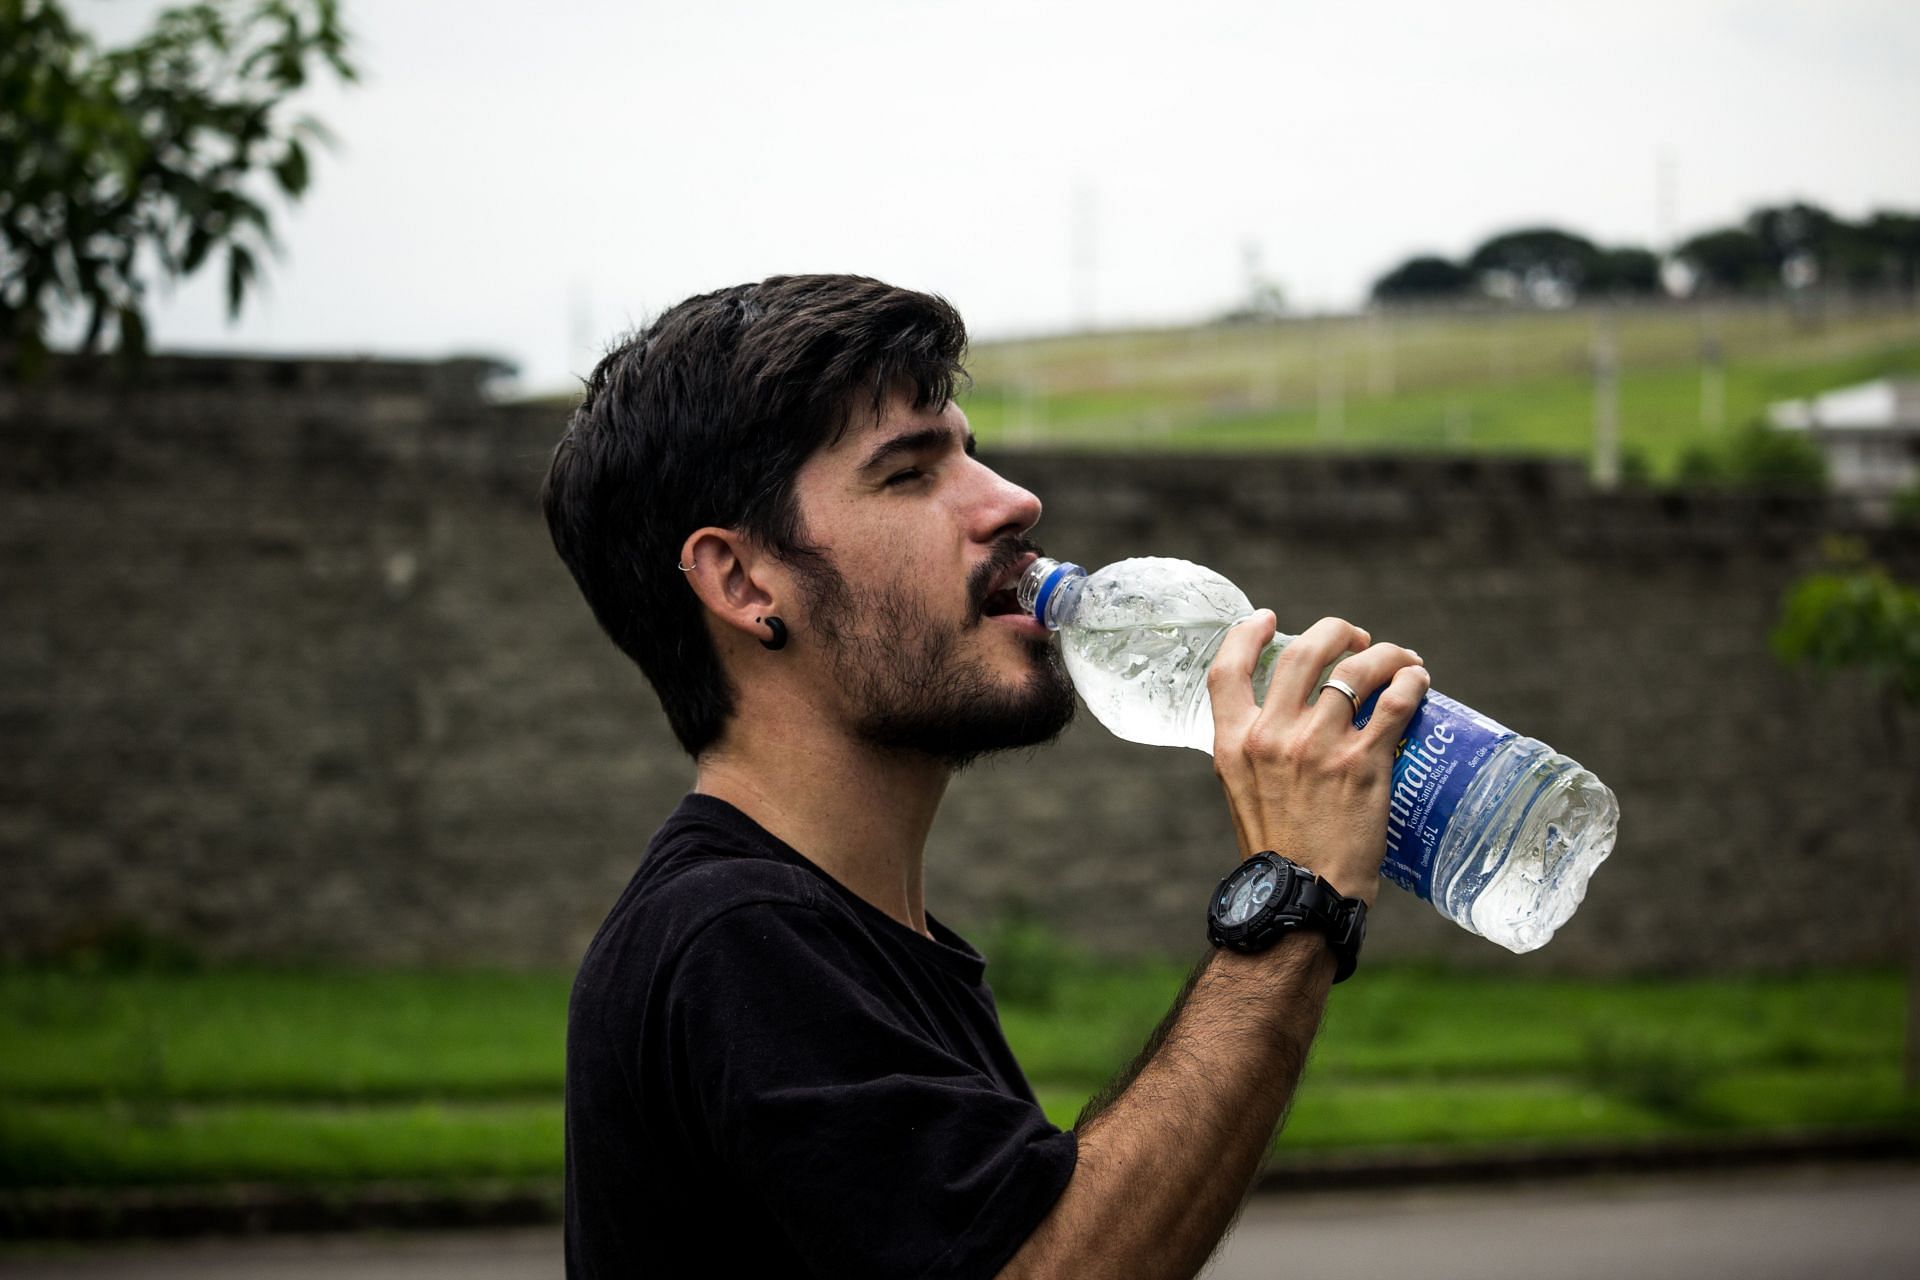 Severe dehydration symptoms can manifest as headaches, dizziness and more (Image via Pexels @Mauricio Mascaro)